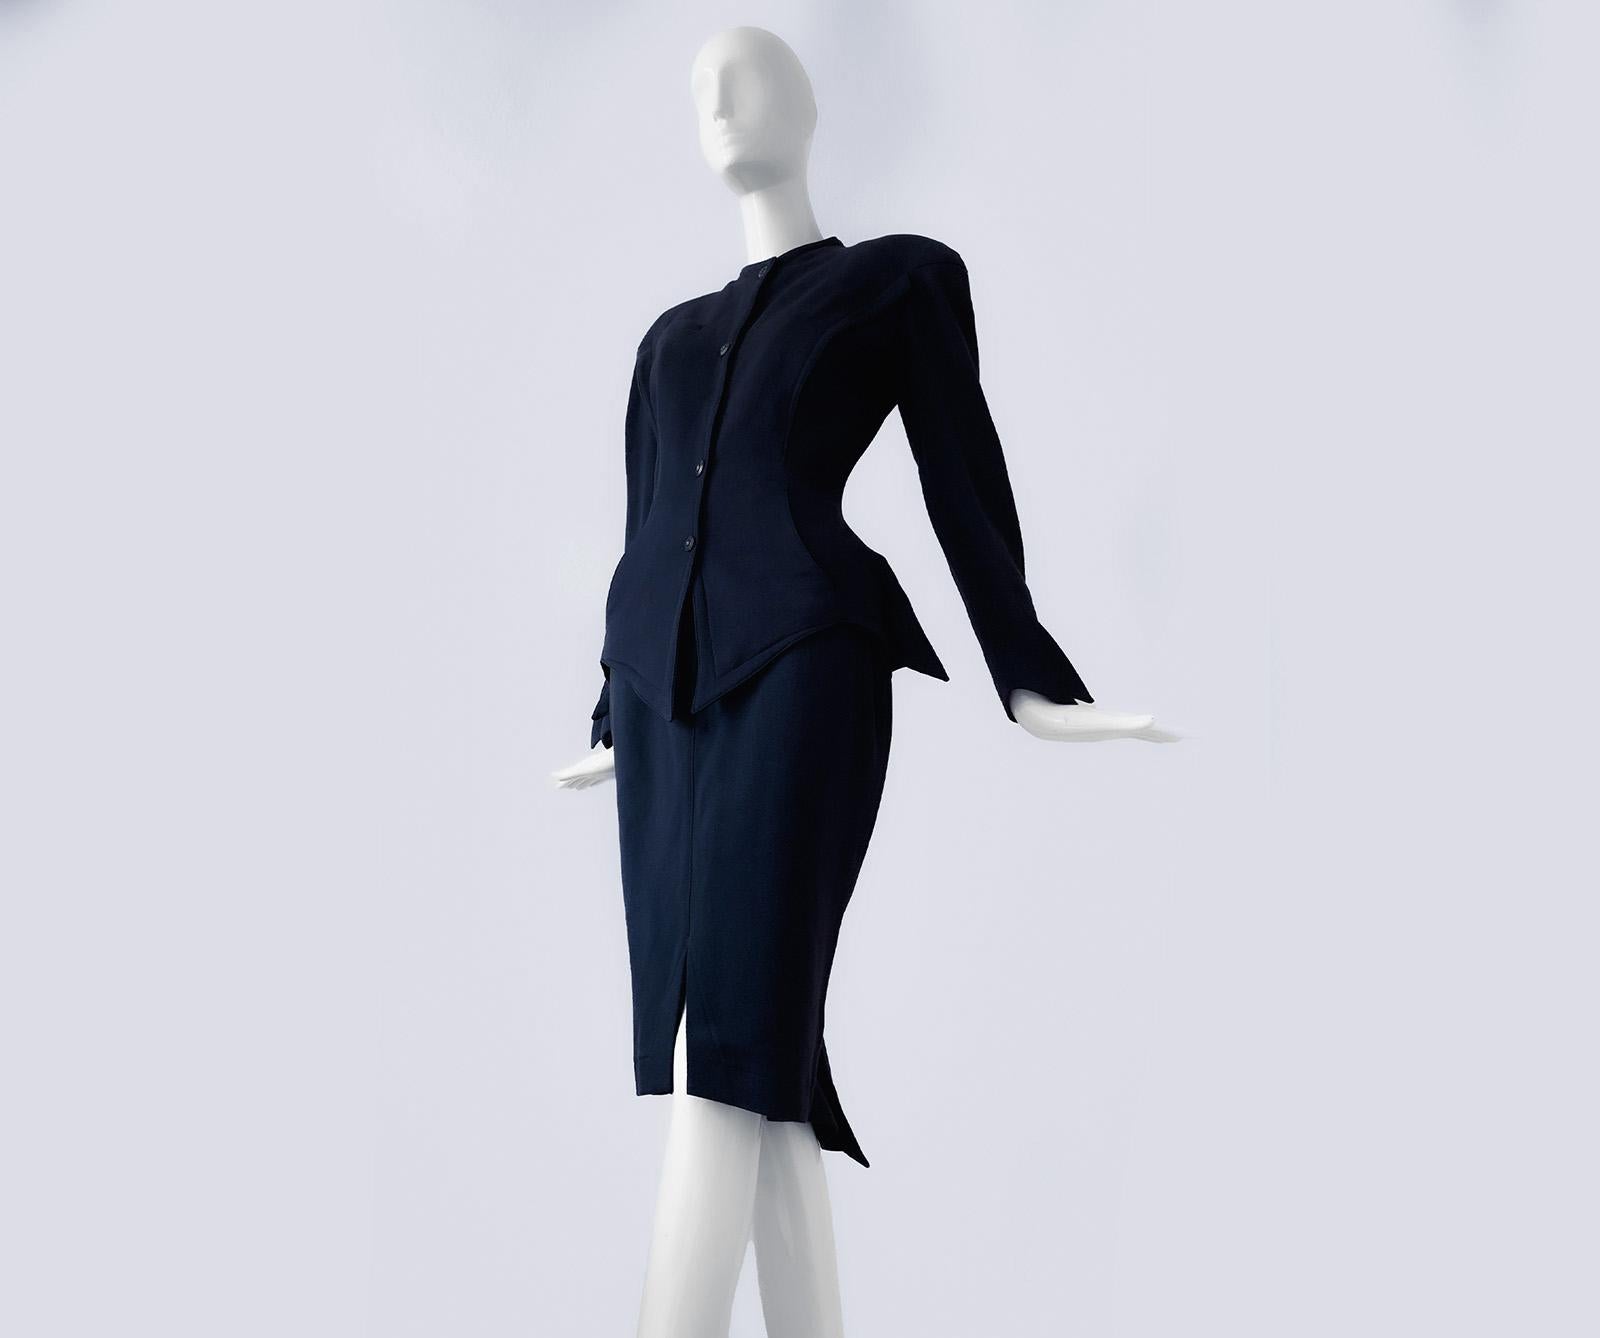 Thierry Mugler Rare Dramatic Suit Skirtsuit Silhouette Wool Blazer Skirt 80s For Sale 2